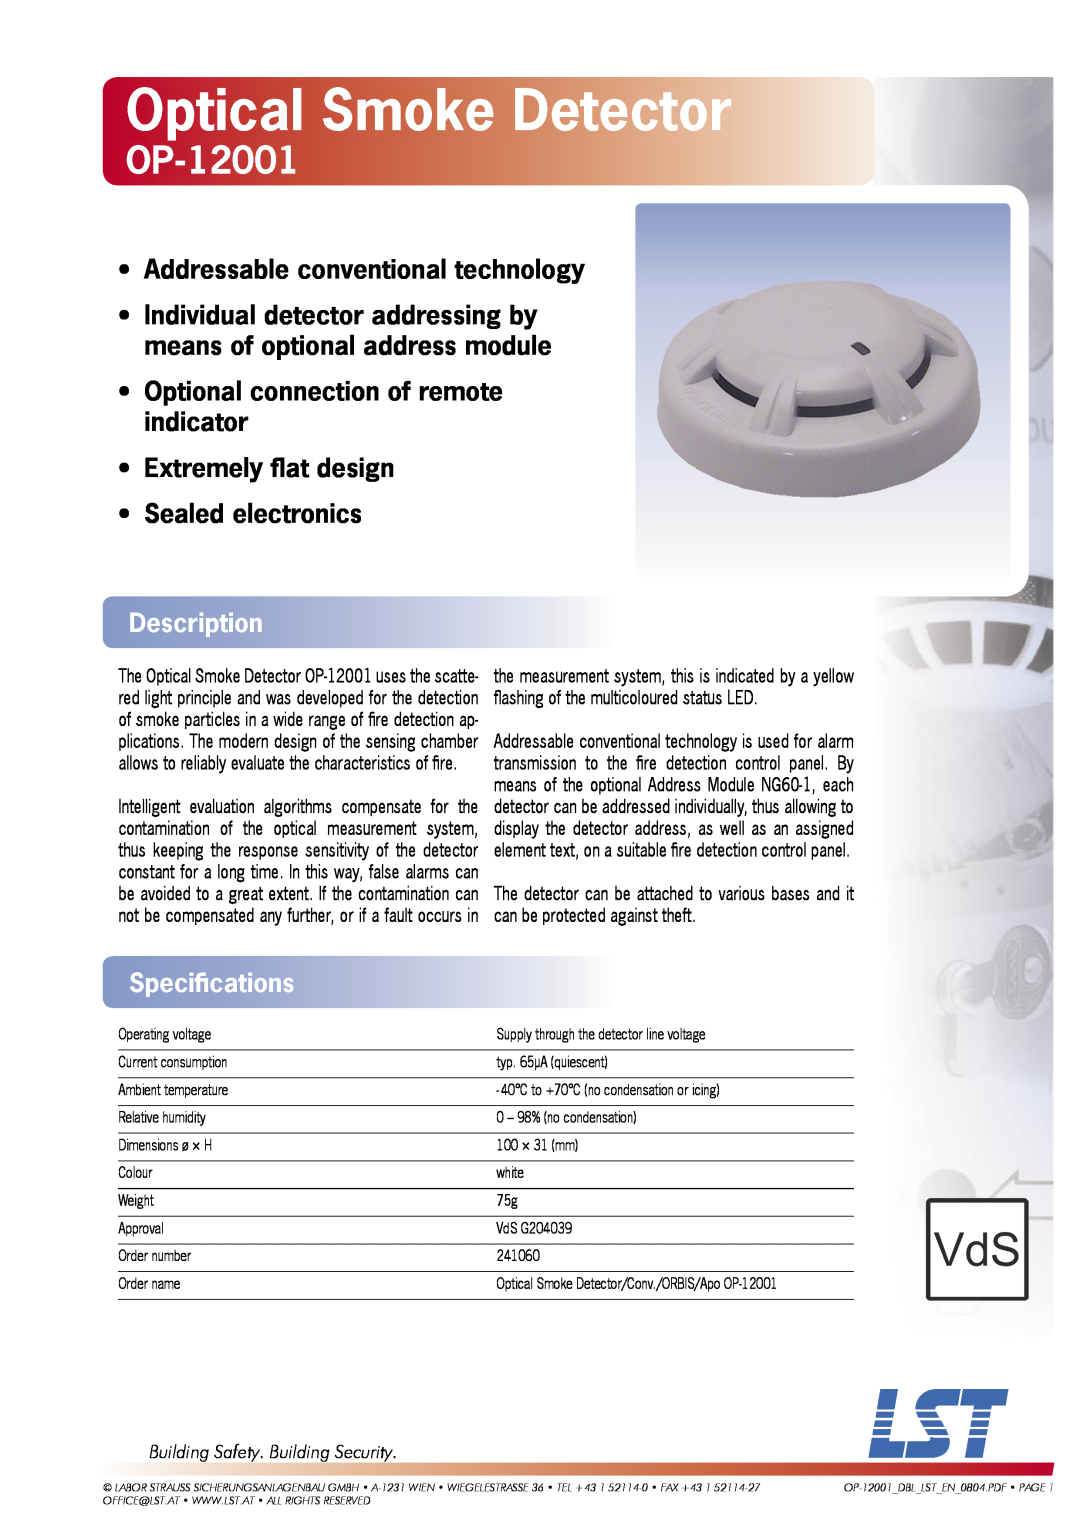 LST OP-12001 specifications Optical Smoke Detector, Addressable conventional technology, Description, Speciﬁcations 